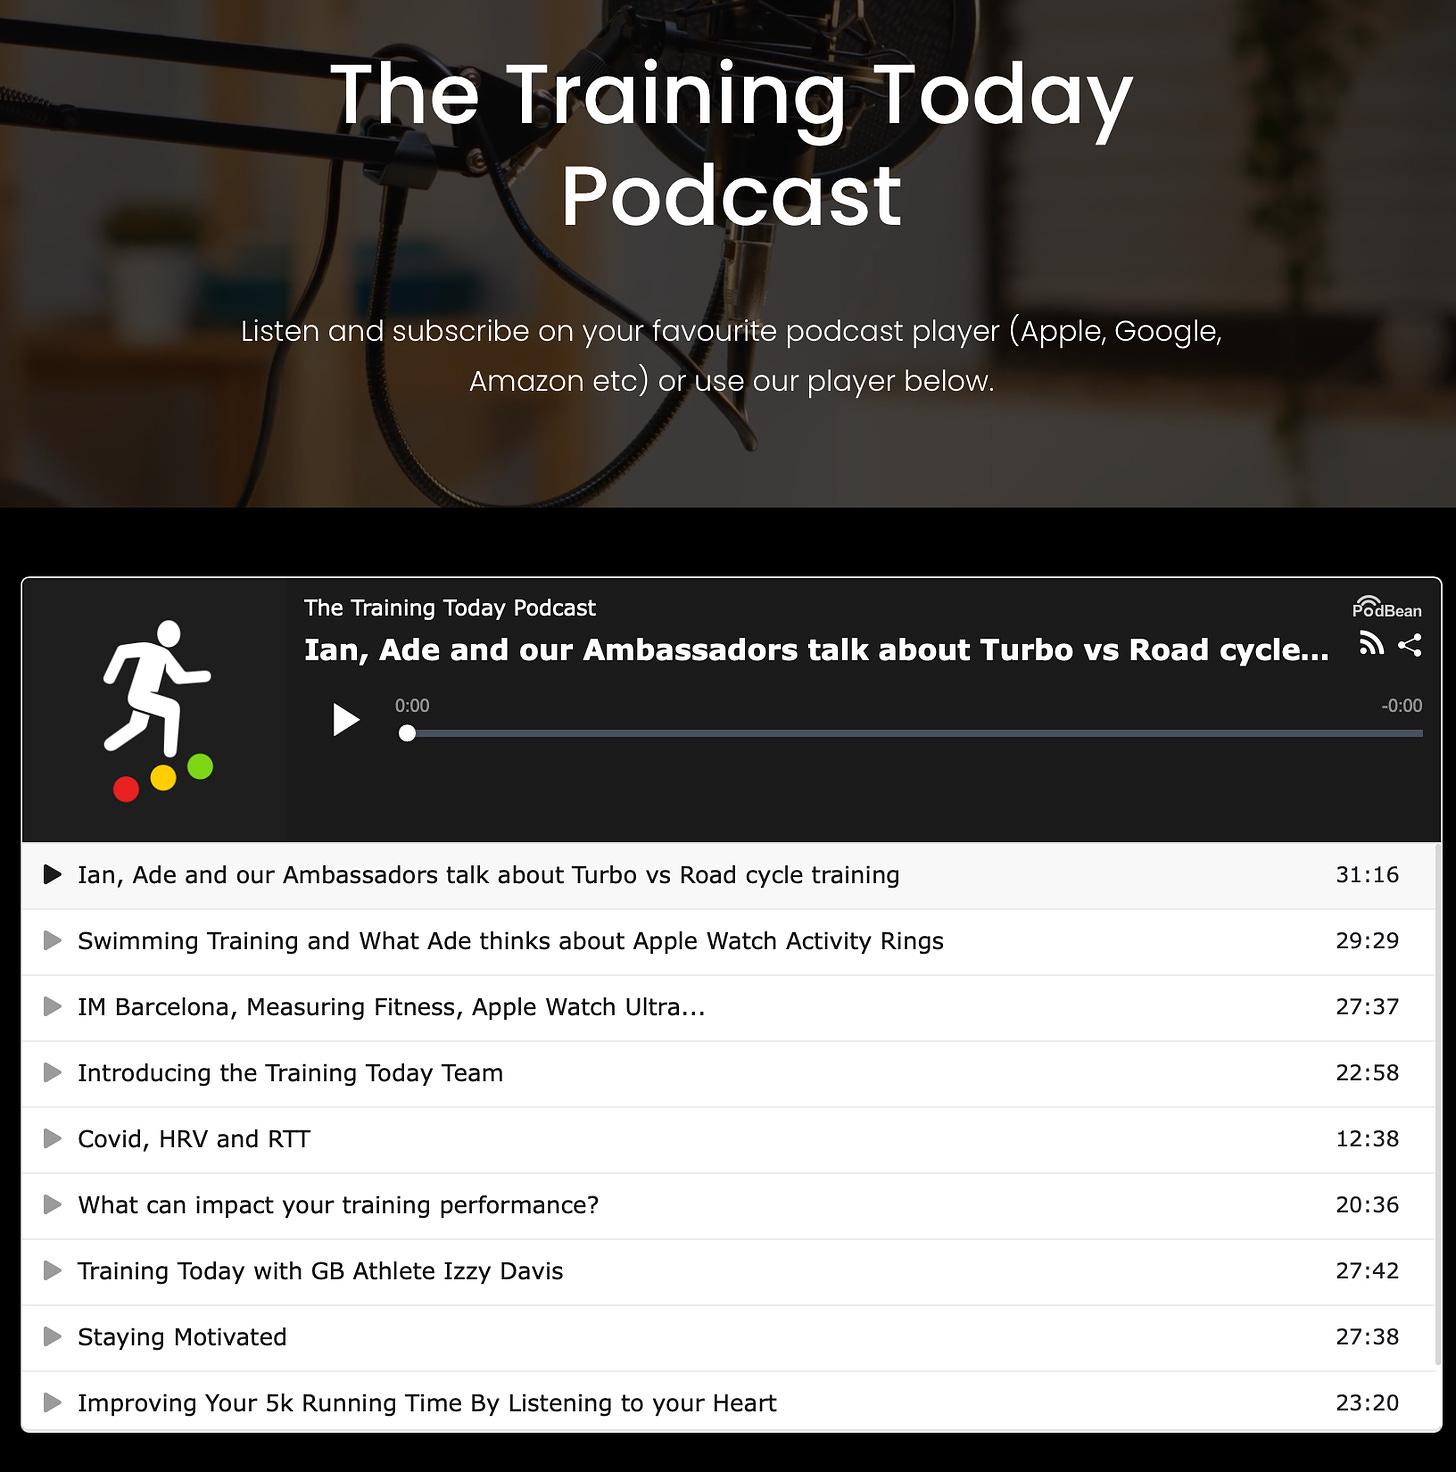 The Training Today Podcast